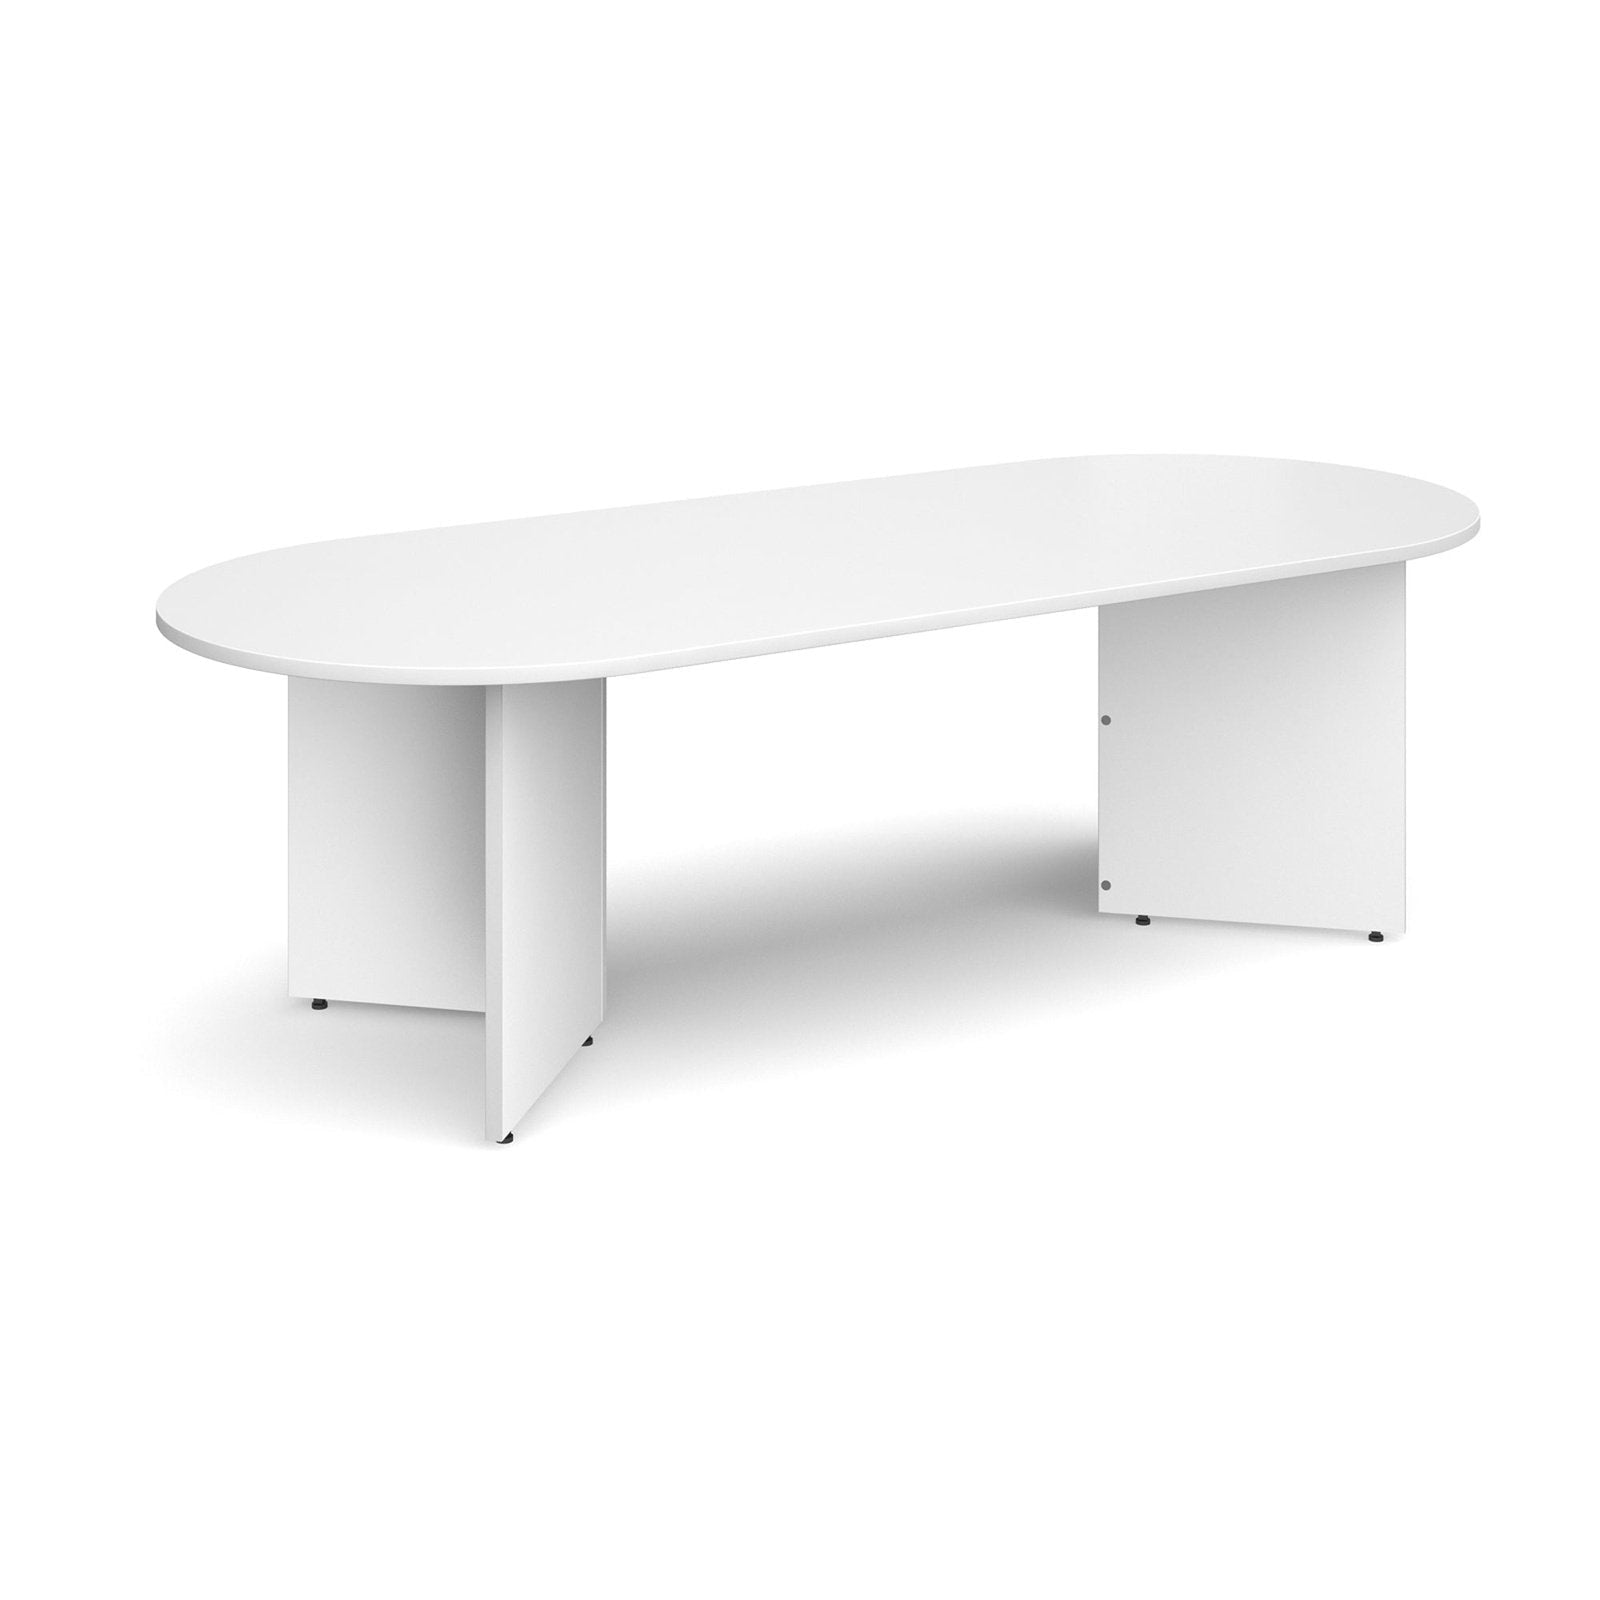 Arrow head leg radial end boardroom table - Office Products Online